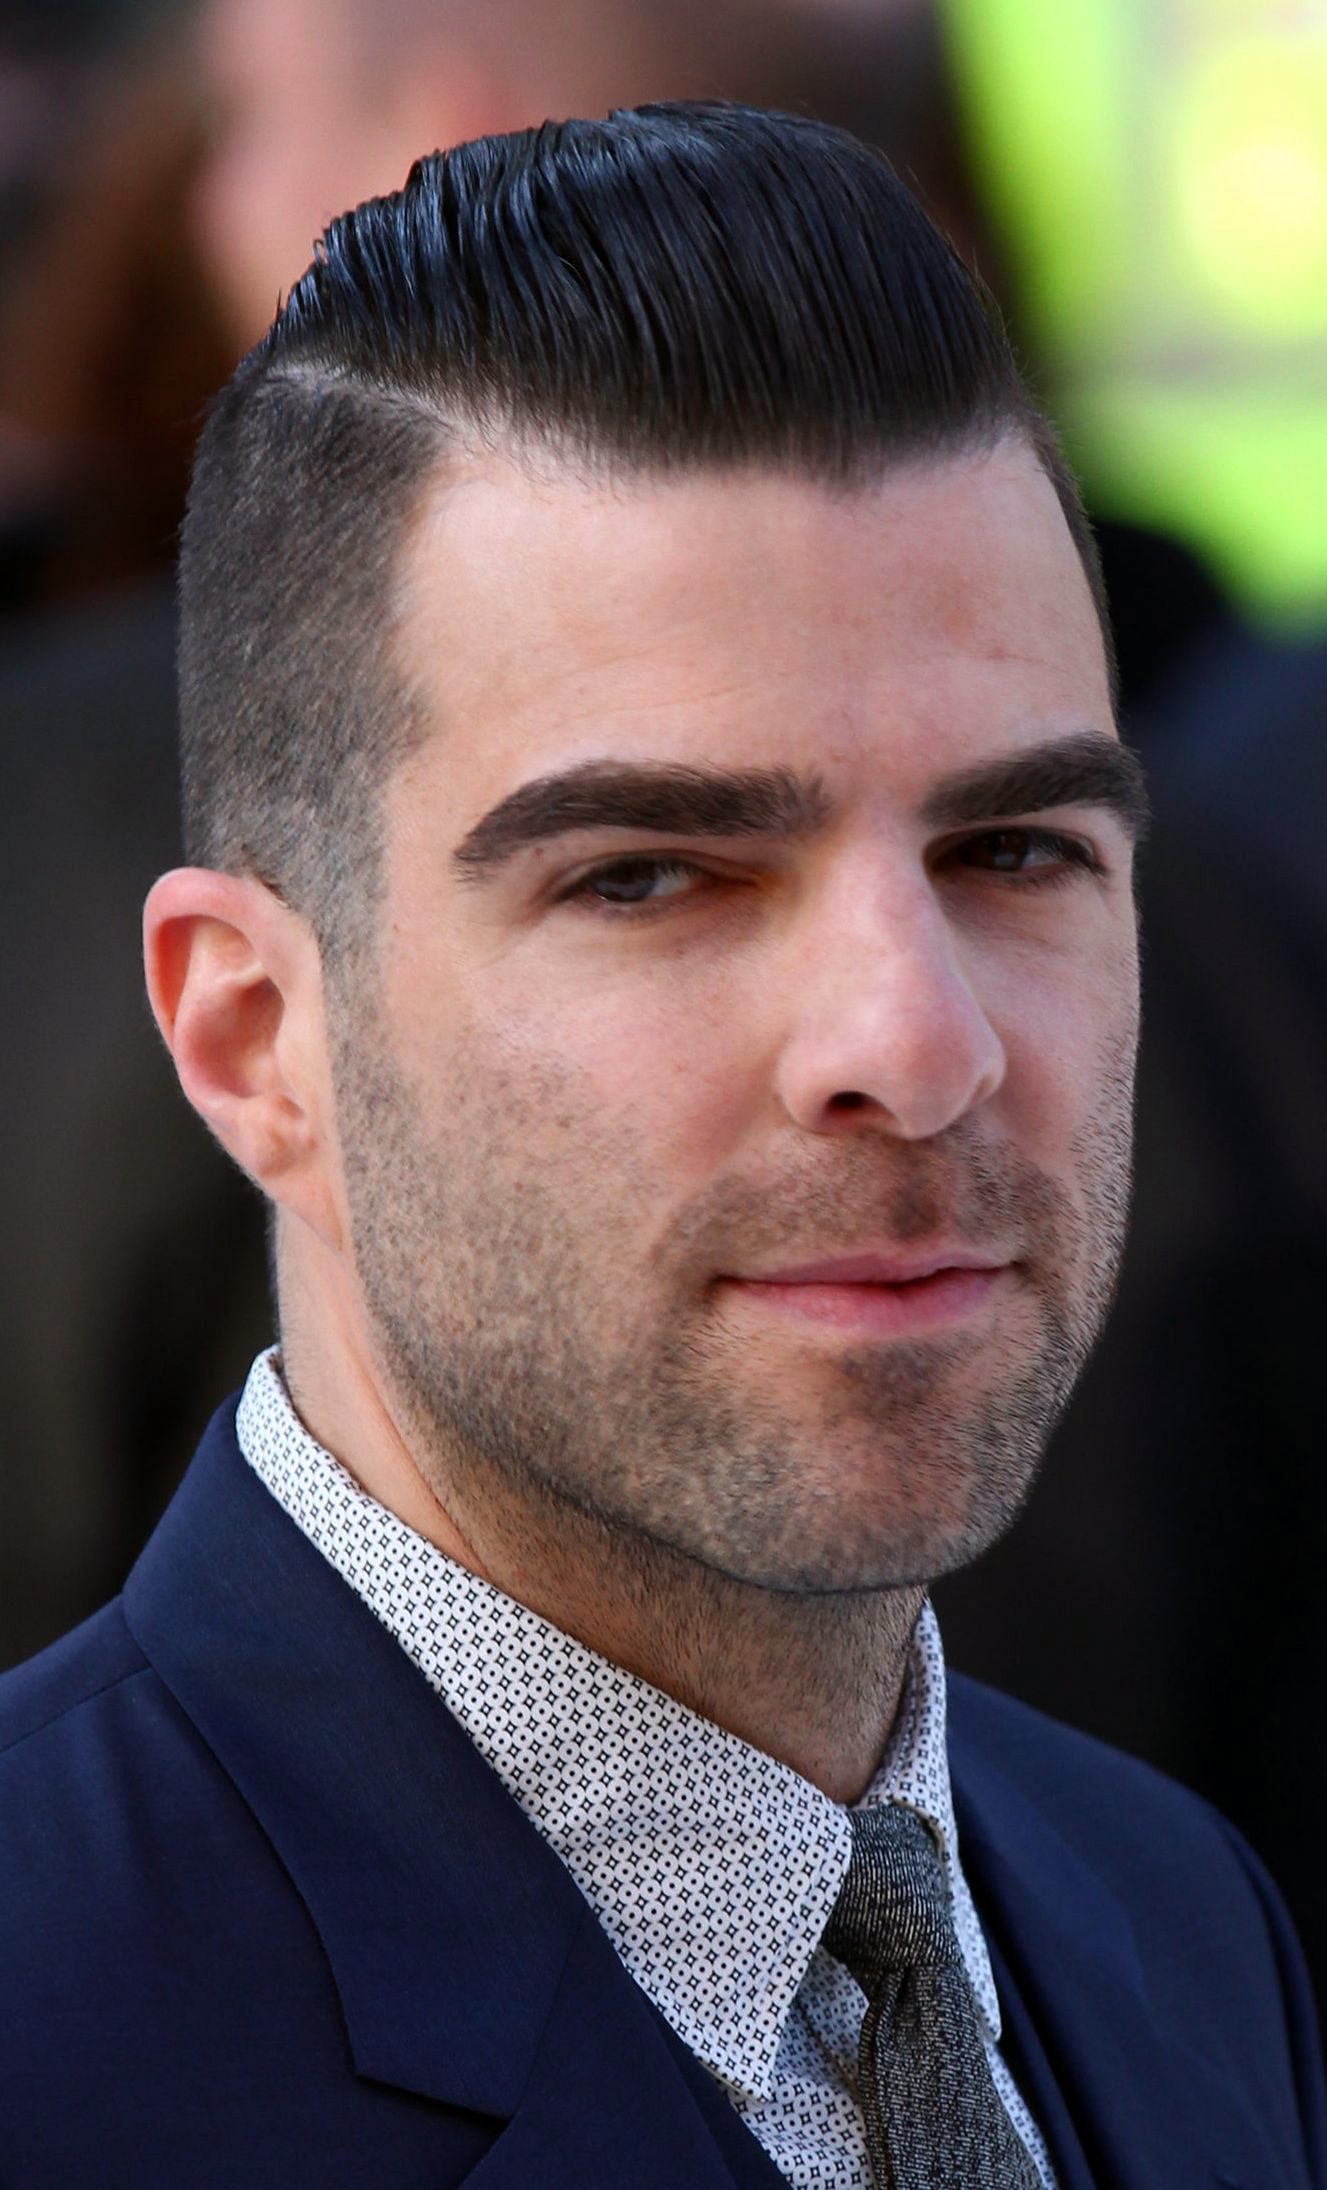 Zachary Quinto slicked back undercut with hard part